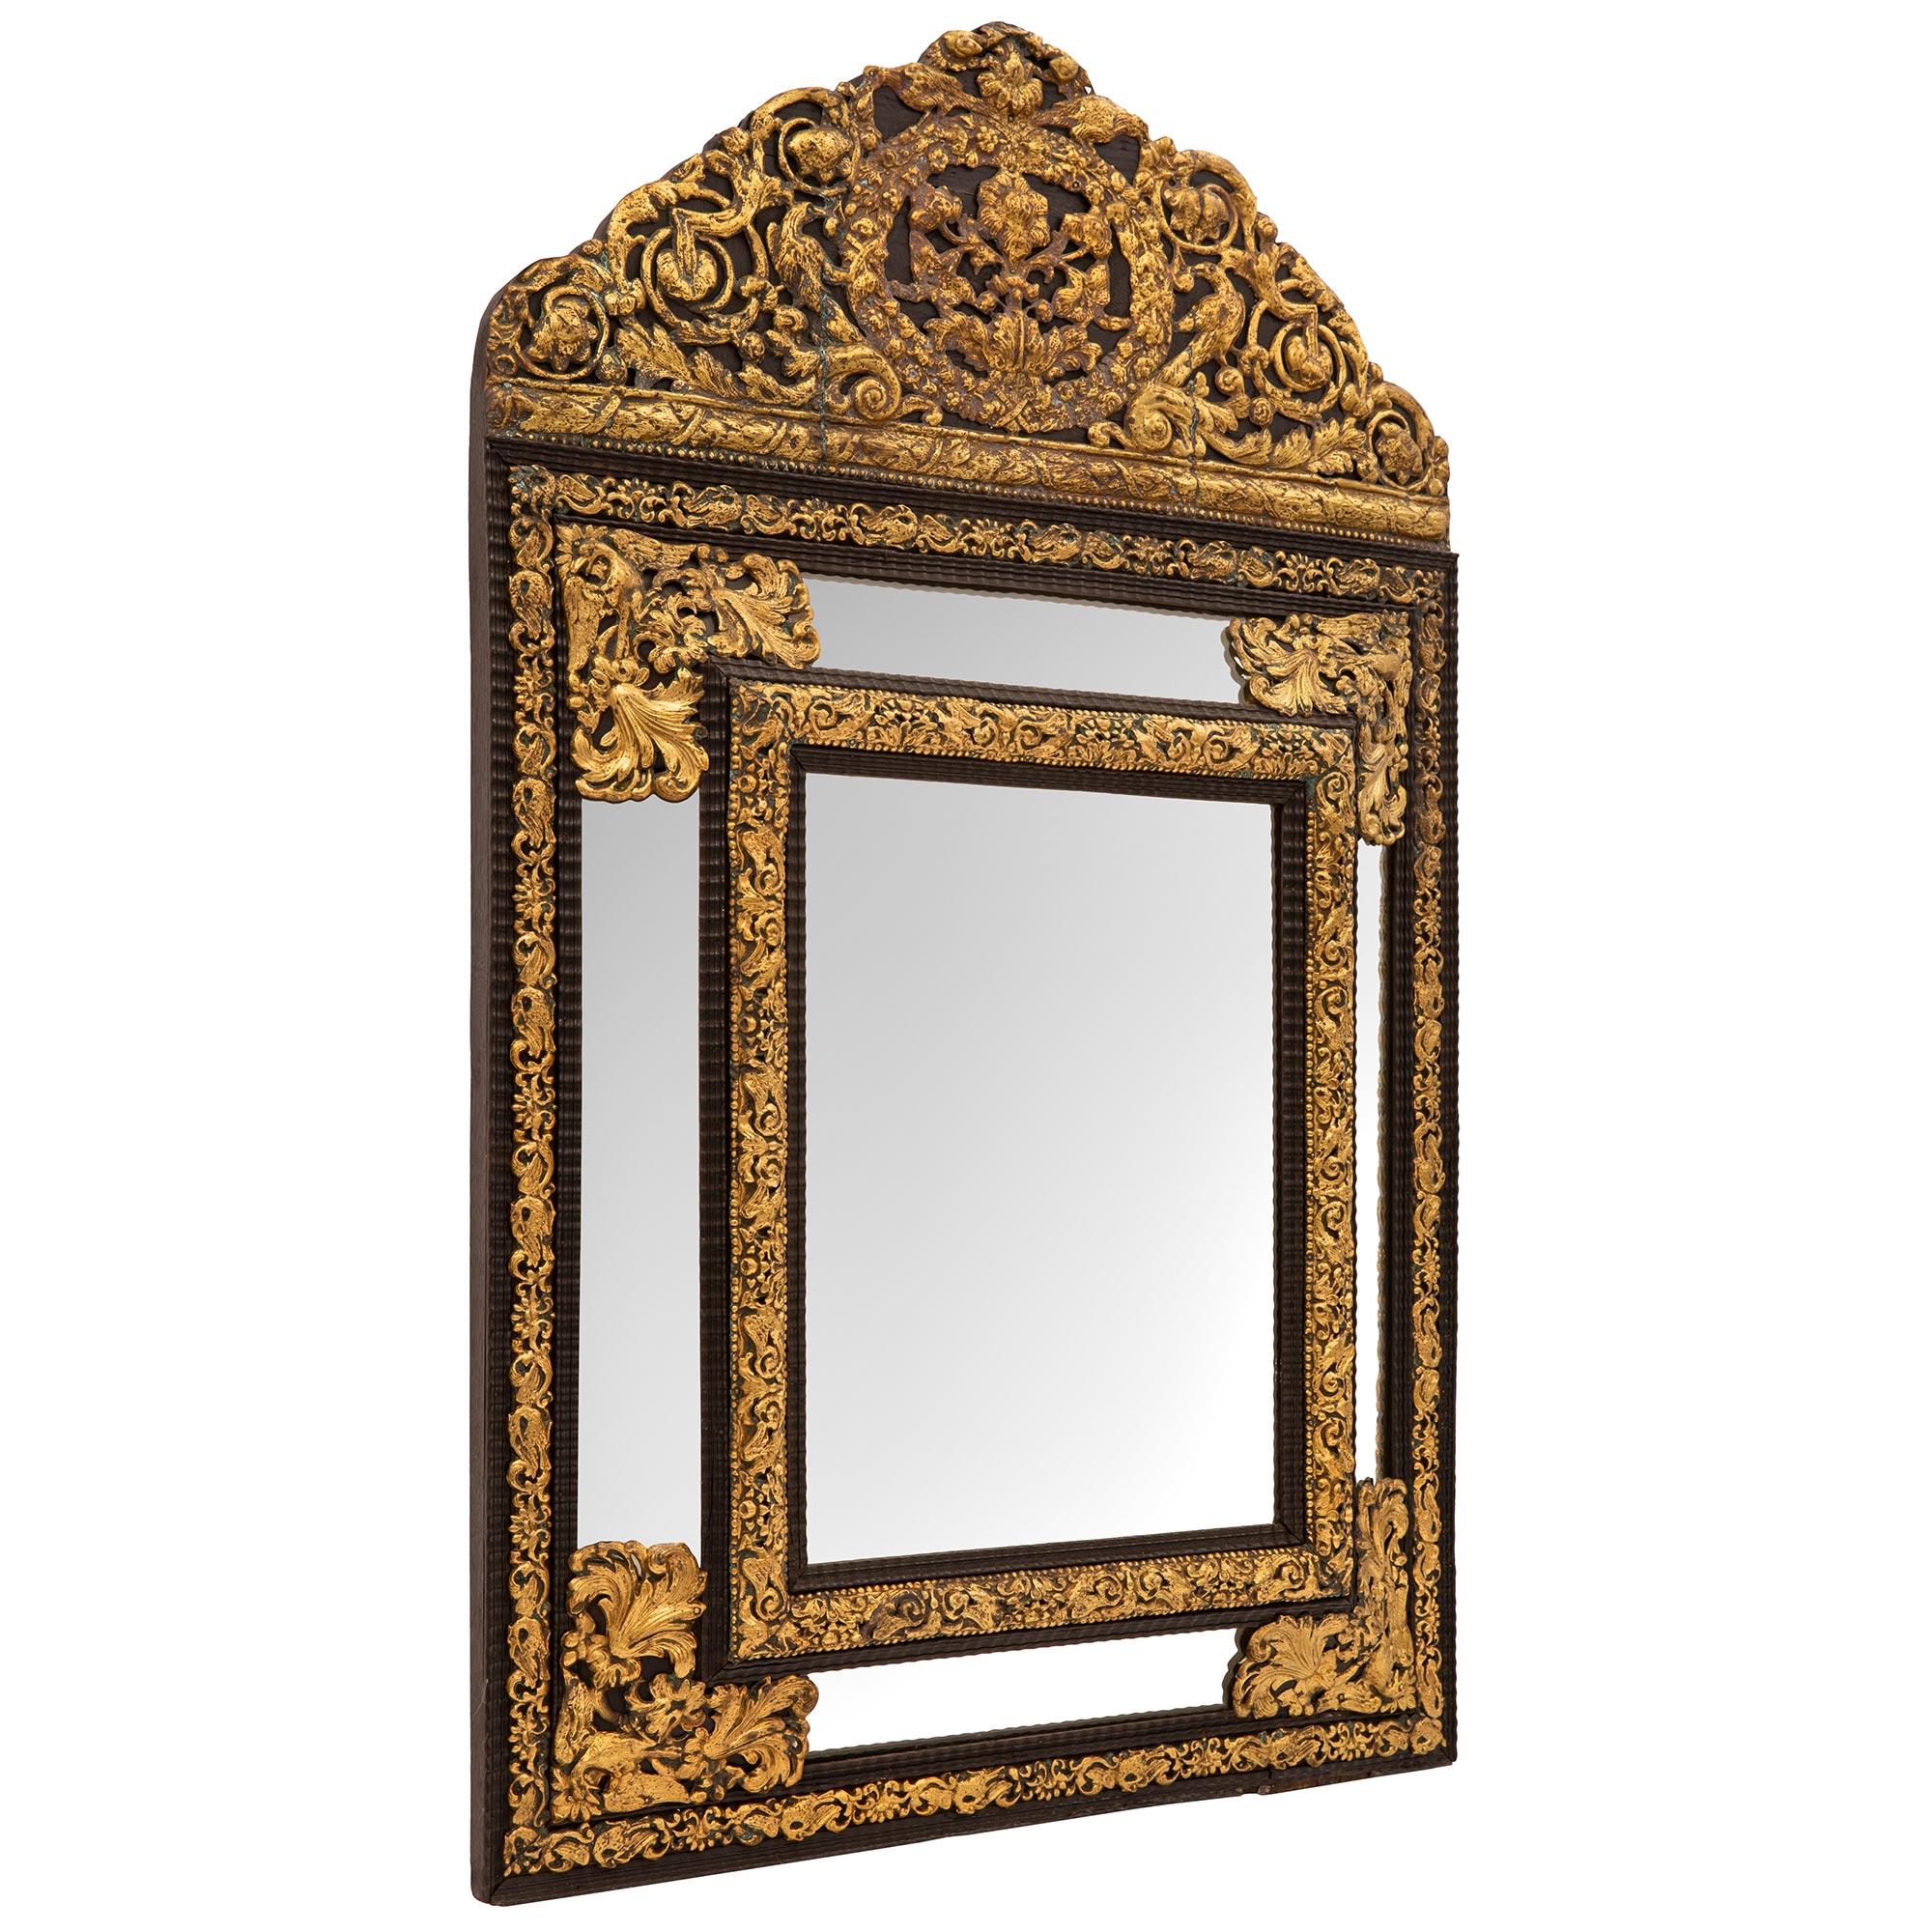 A most attractive Dutch 19th century ebony and gilt metal double framed mirror. The mirror retains all of its original mirror plates throughout with the central plate set within a mottled ebony border with a wave like design and an impressive